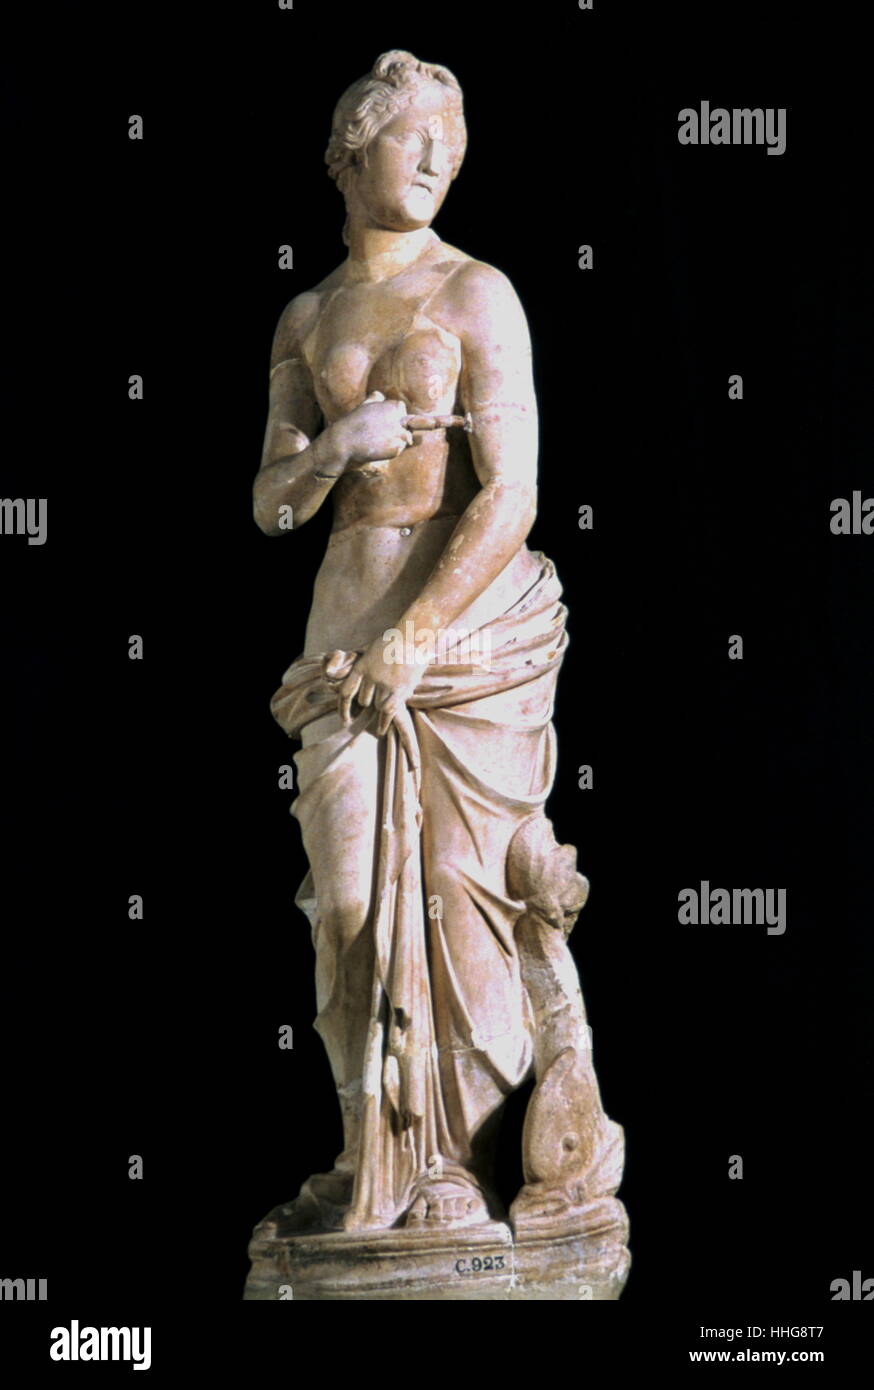 2nd century statue of Venus, Roman goddess of love and beauty, displayed at the Bardo museum in Tunis Stock Photo